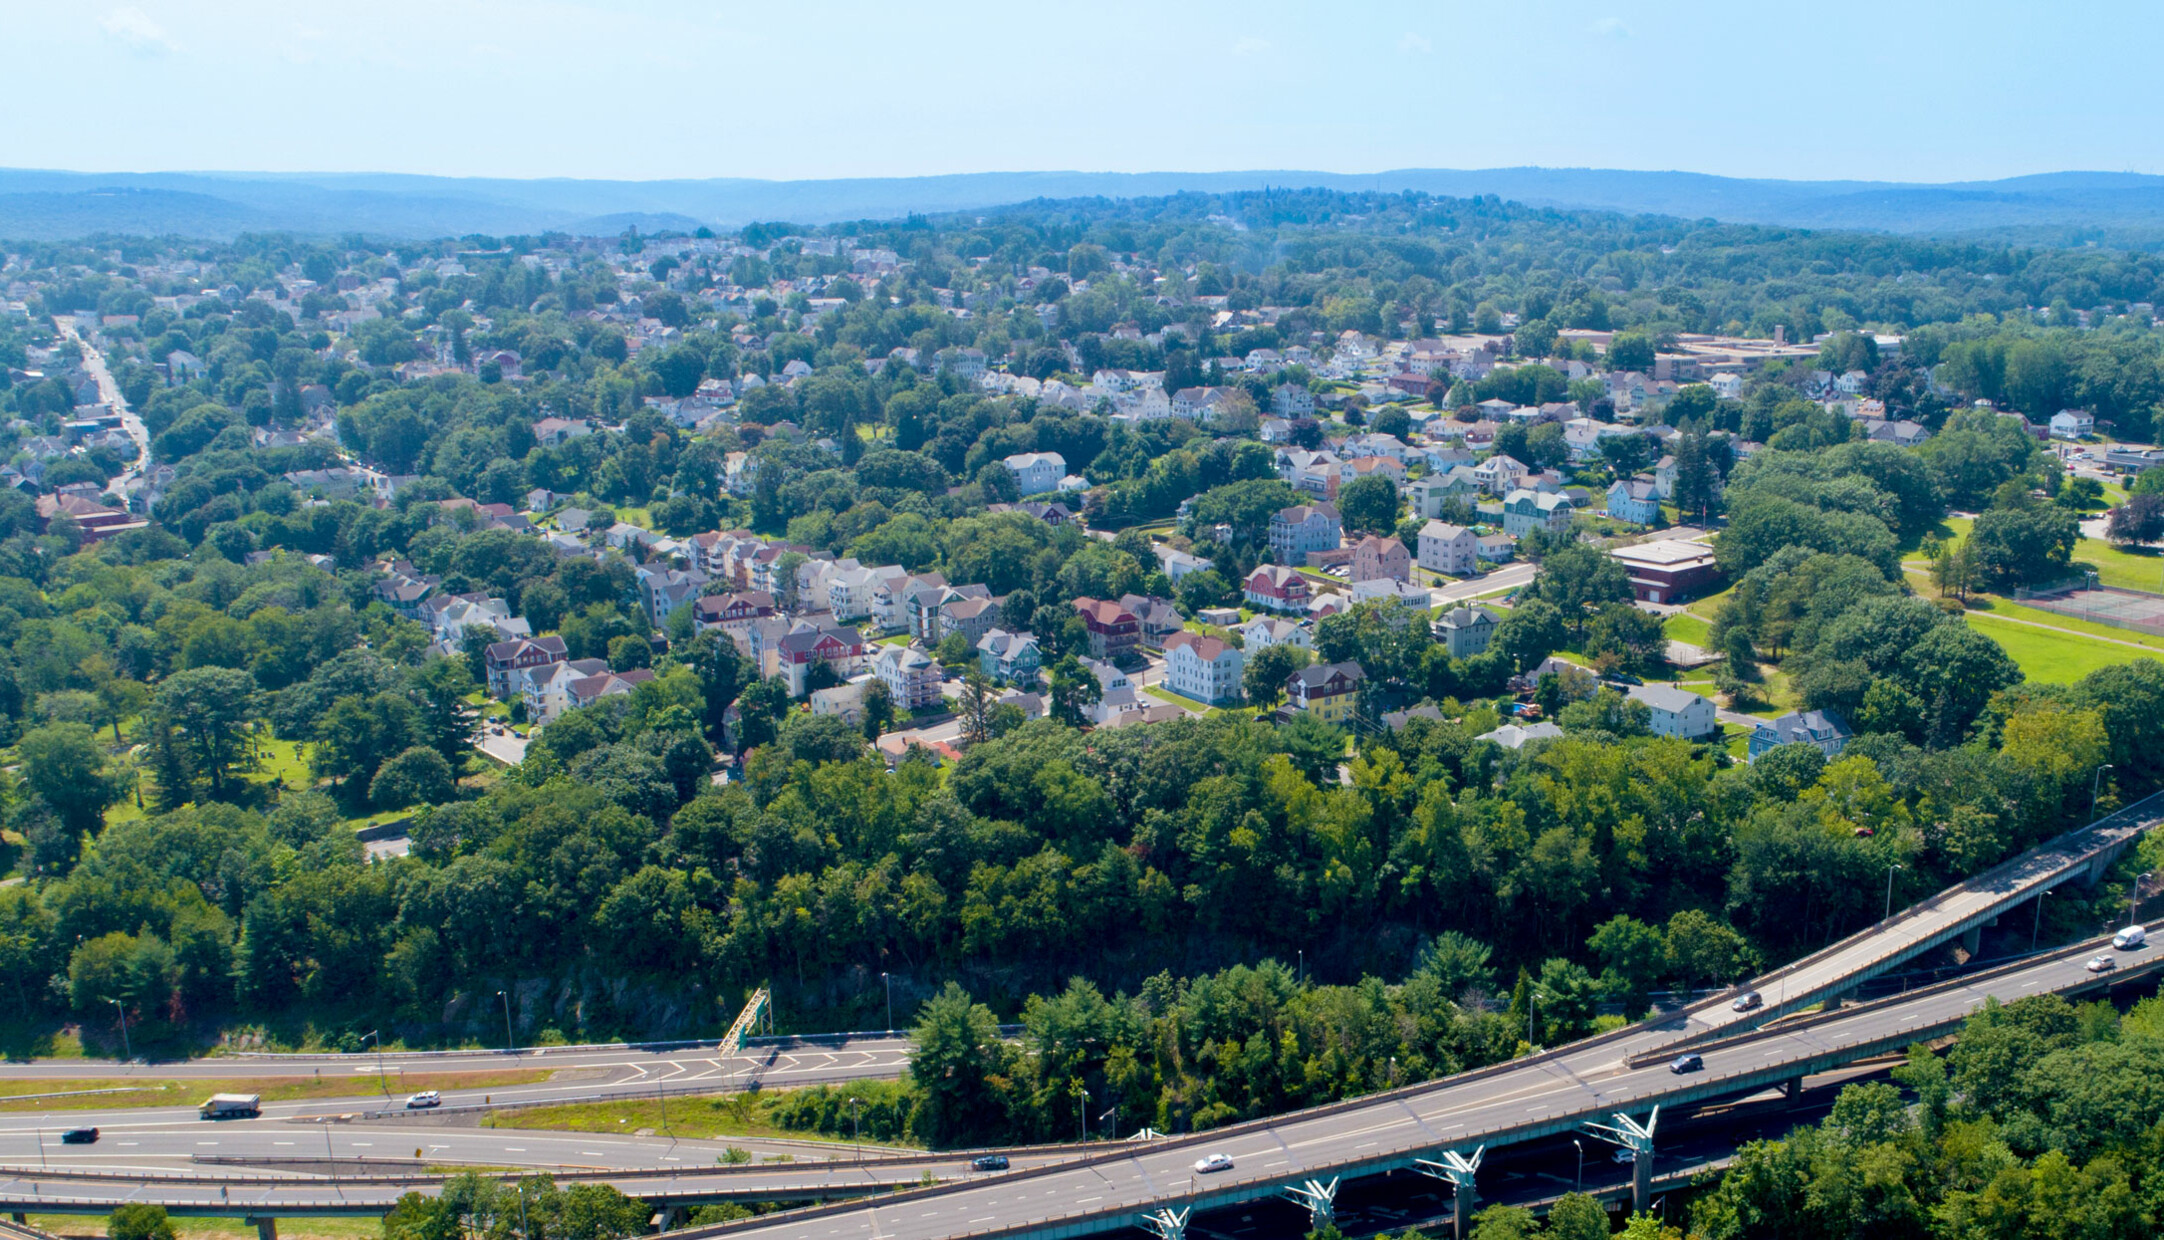 An aerial view of houses and streets in the Town Plot neighborhood in Waterbury